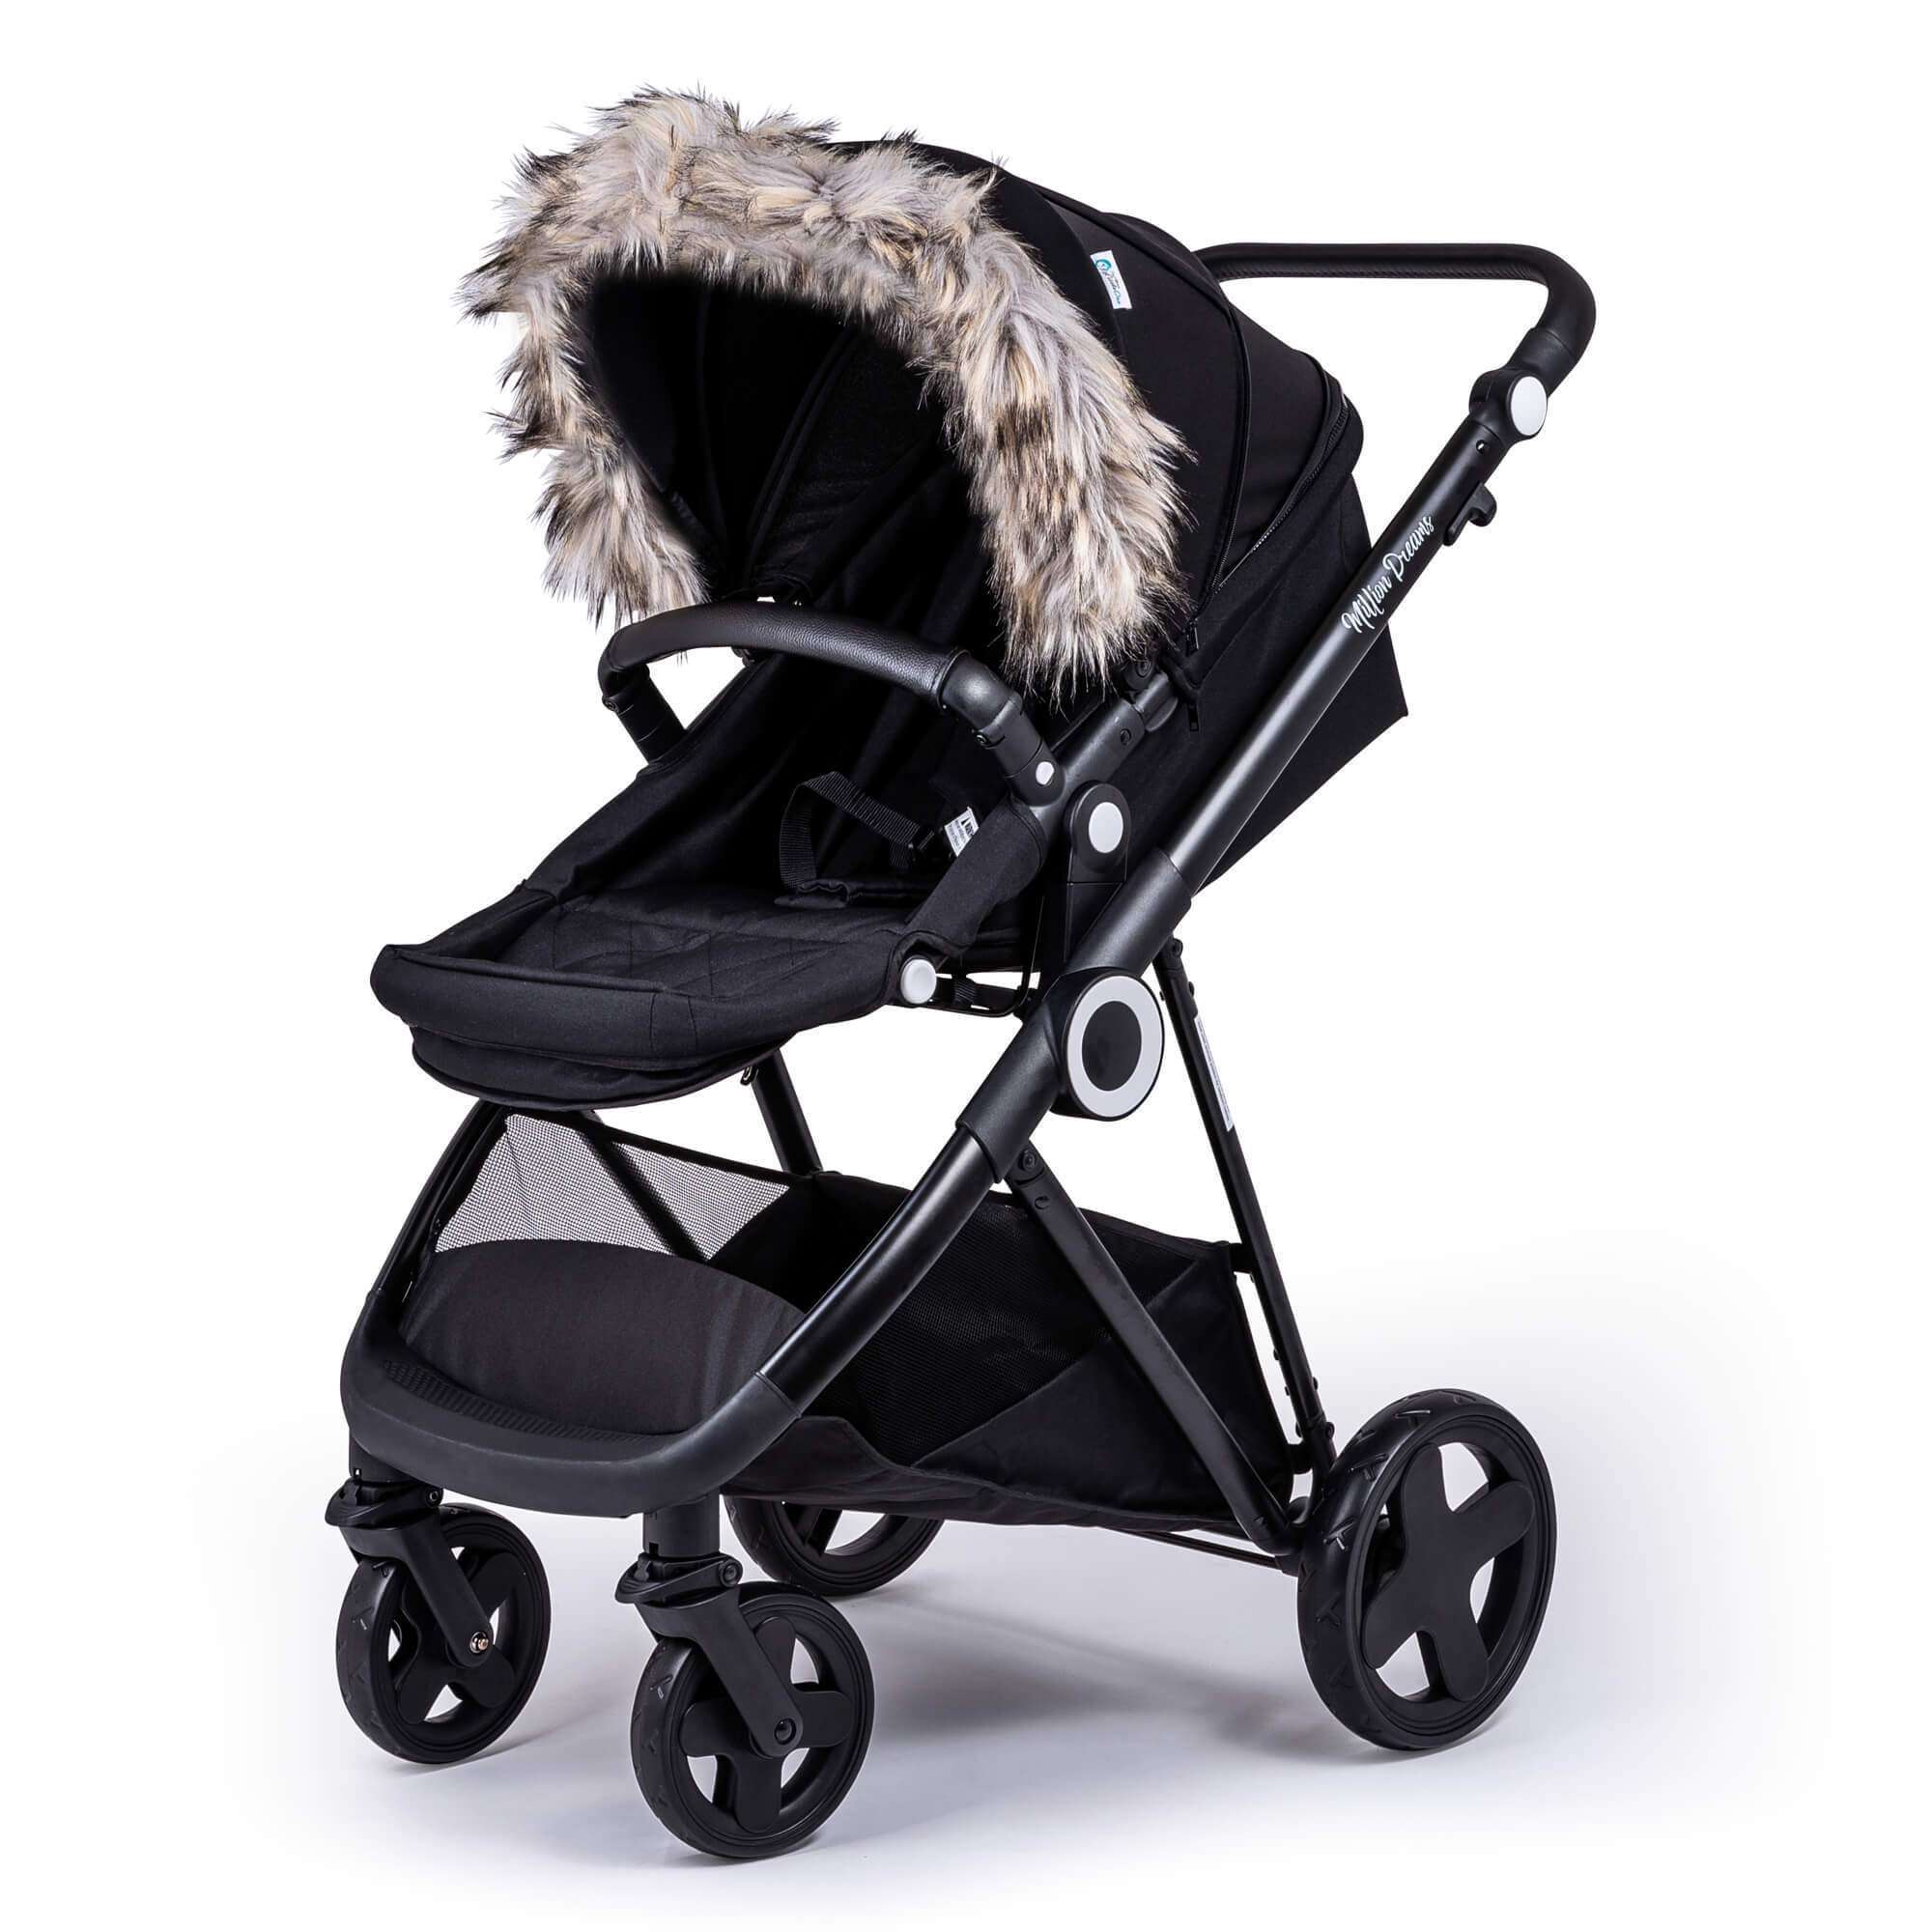 Pram Fur Hood Trim Attachment for Pushchair Compatible with Urban Detour - Light Grey / Fits All Models | For Your Little One